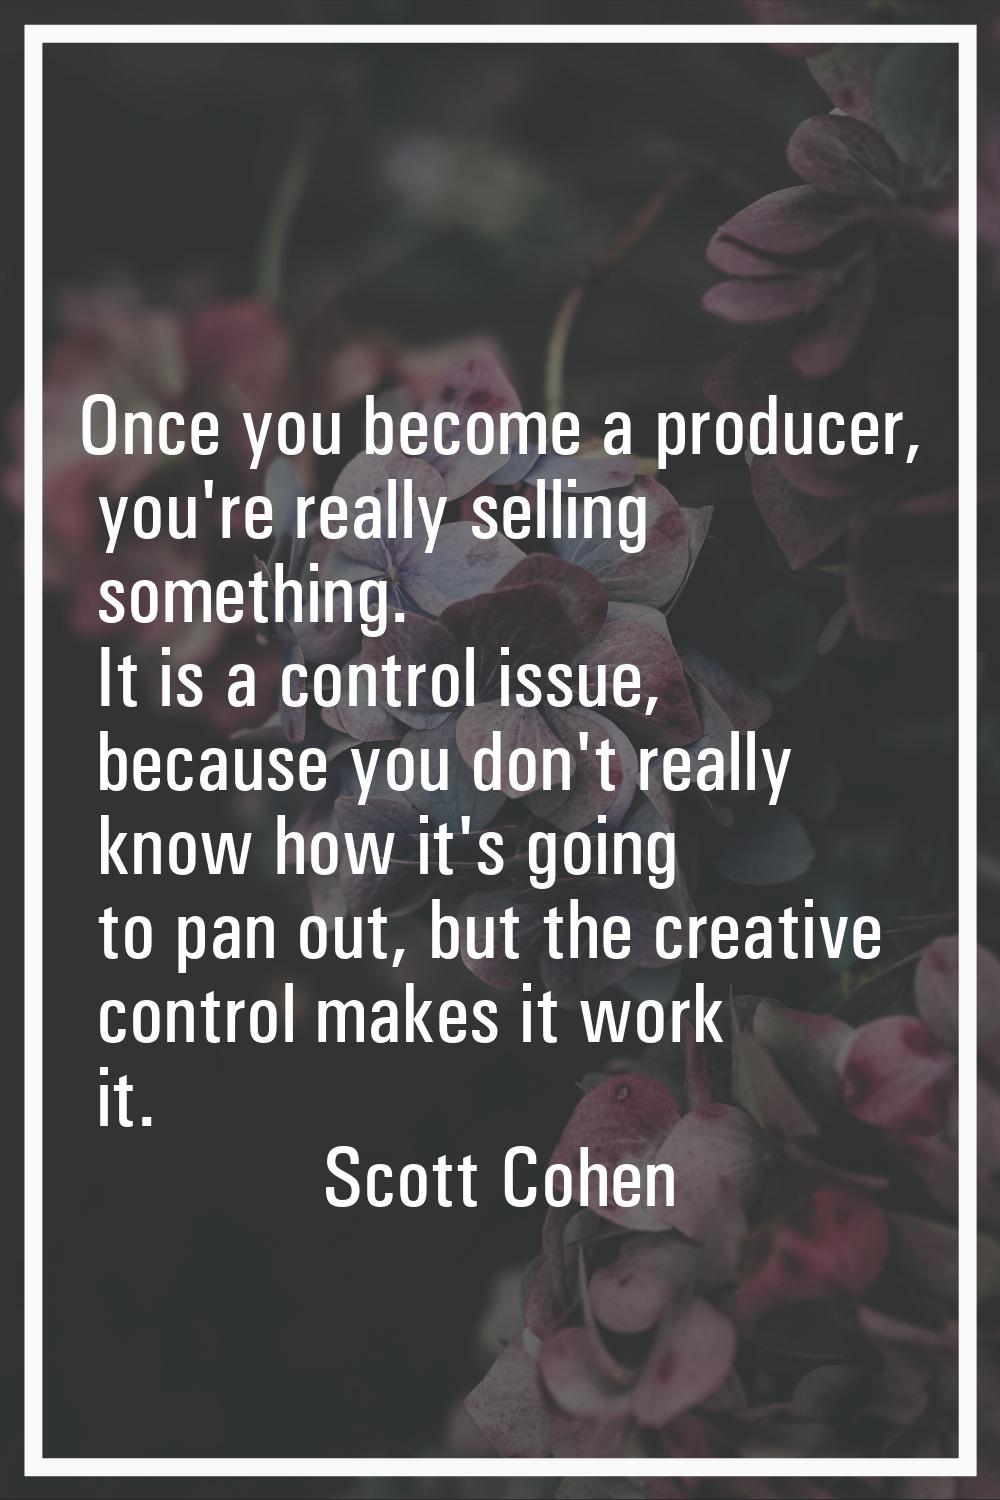 Once you become a producer, you're really selling something. It is a control issue, because you don